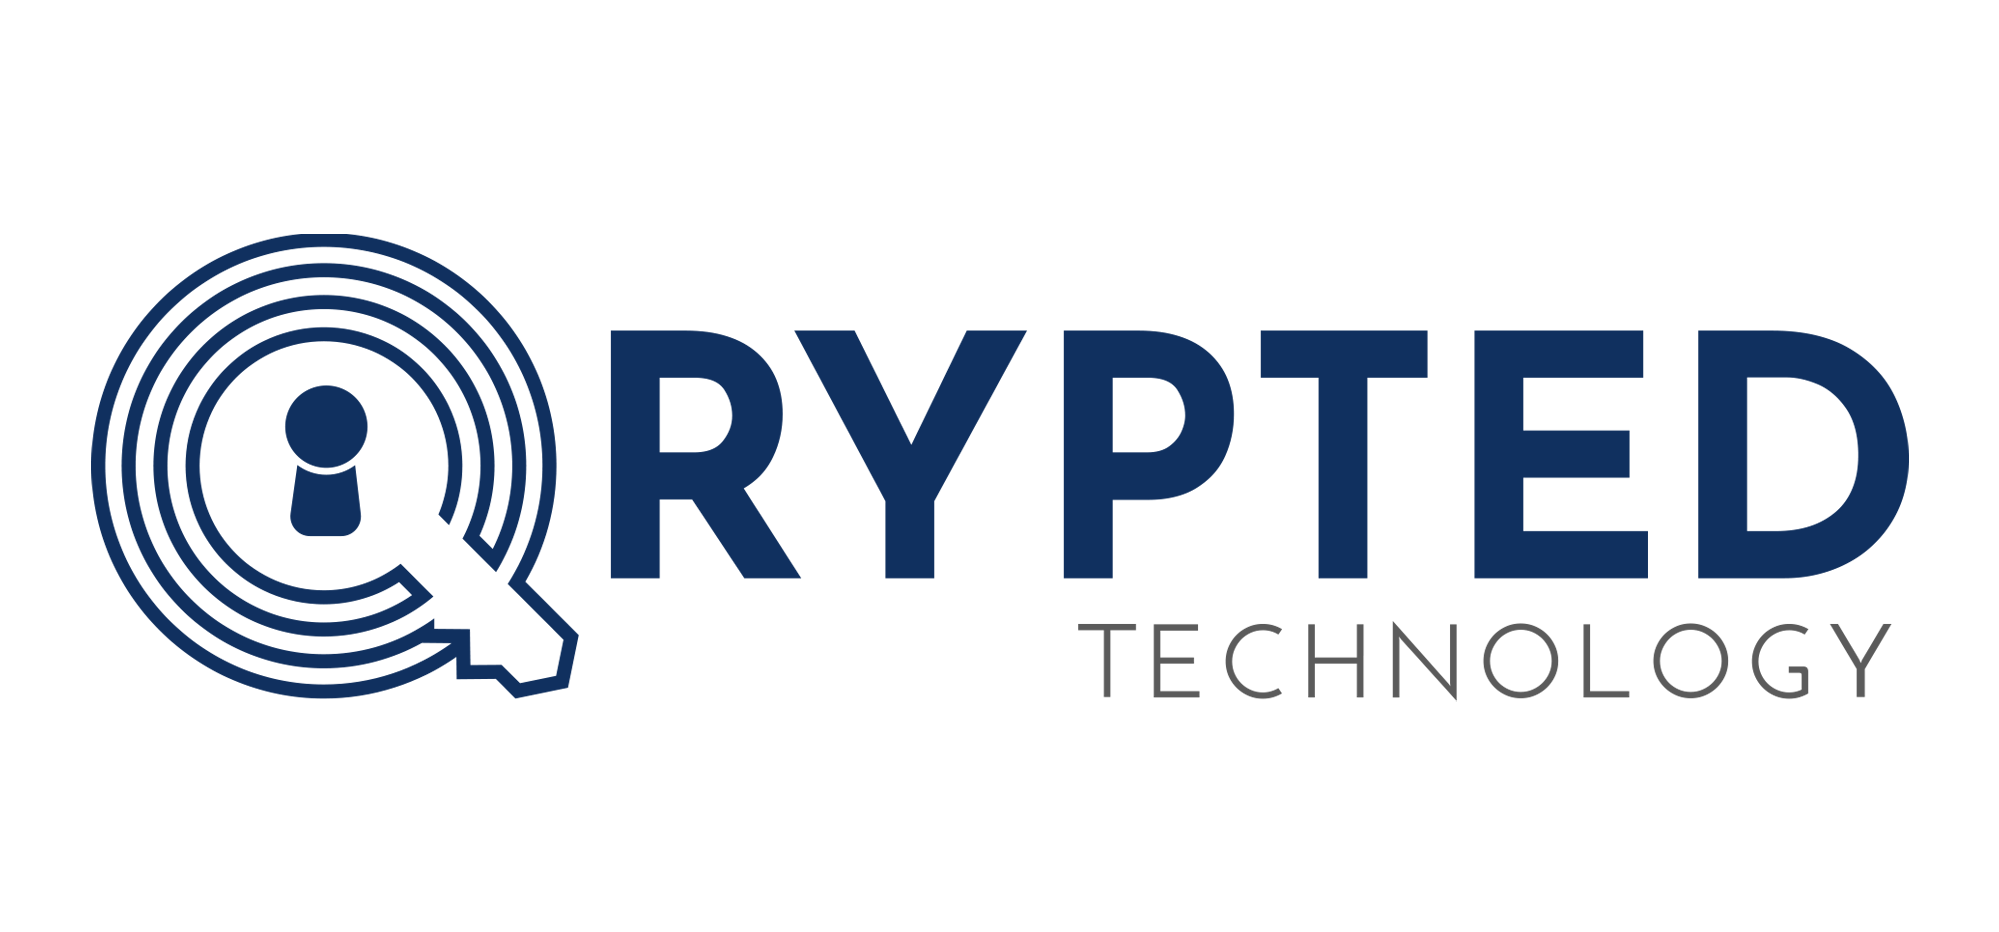 Qrypted Technology